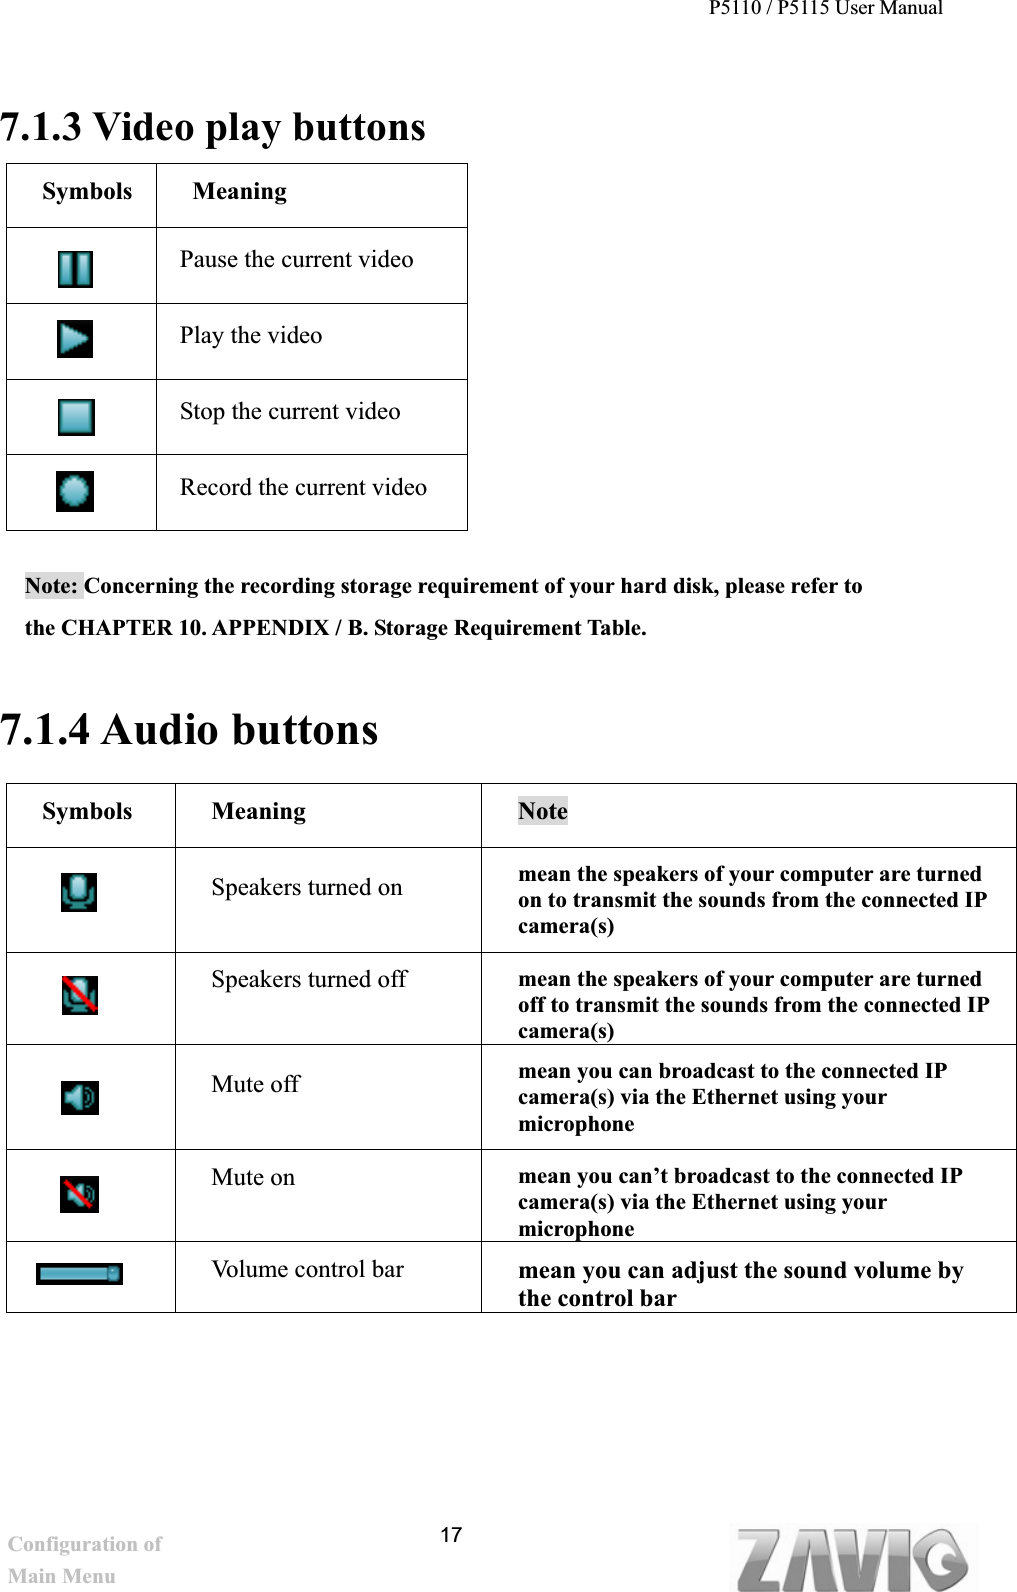 P5110 / P5115 User Manual   177.1.3 Video play buttons Symbols Meaning Pause the current video Play the video Stop the current video Record the current video Note: Concerning the recording storage requirement of your hard disk, please refer to                 the CHAPTER 10. APPENDIX / B. Storage Requirement Table.7.1.4 Audio buttons   Symbols Meaning  NoteSpeakers turned on  mean the speakers of your computer are turned on to transmit the sounds from the connected IP camera(s)  Speakers turned off  mean the speakers of your computer are turned off to transmit the sounds from the connected IP camera(s)Mute off     mean you can broadcast to the connected IP camera(s) via the Ethernet using your microphone   Mute on  mean you can’t broadcast to the connected IP camera(s) via the Ethernet using your microphone  Volume control bar  mean you can adjust the sound volume by the control bar Configuration of Main Menu 